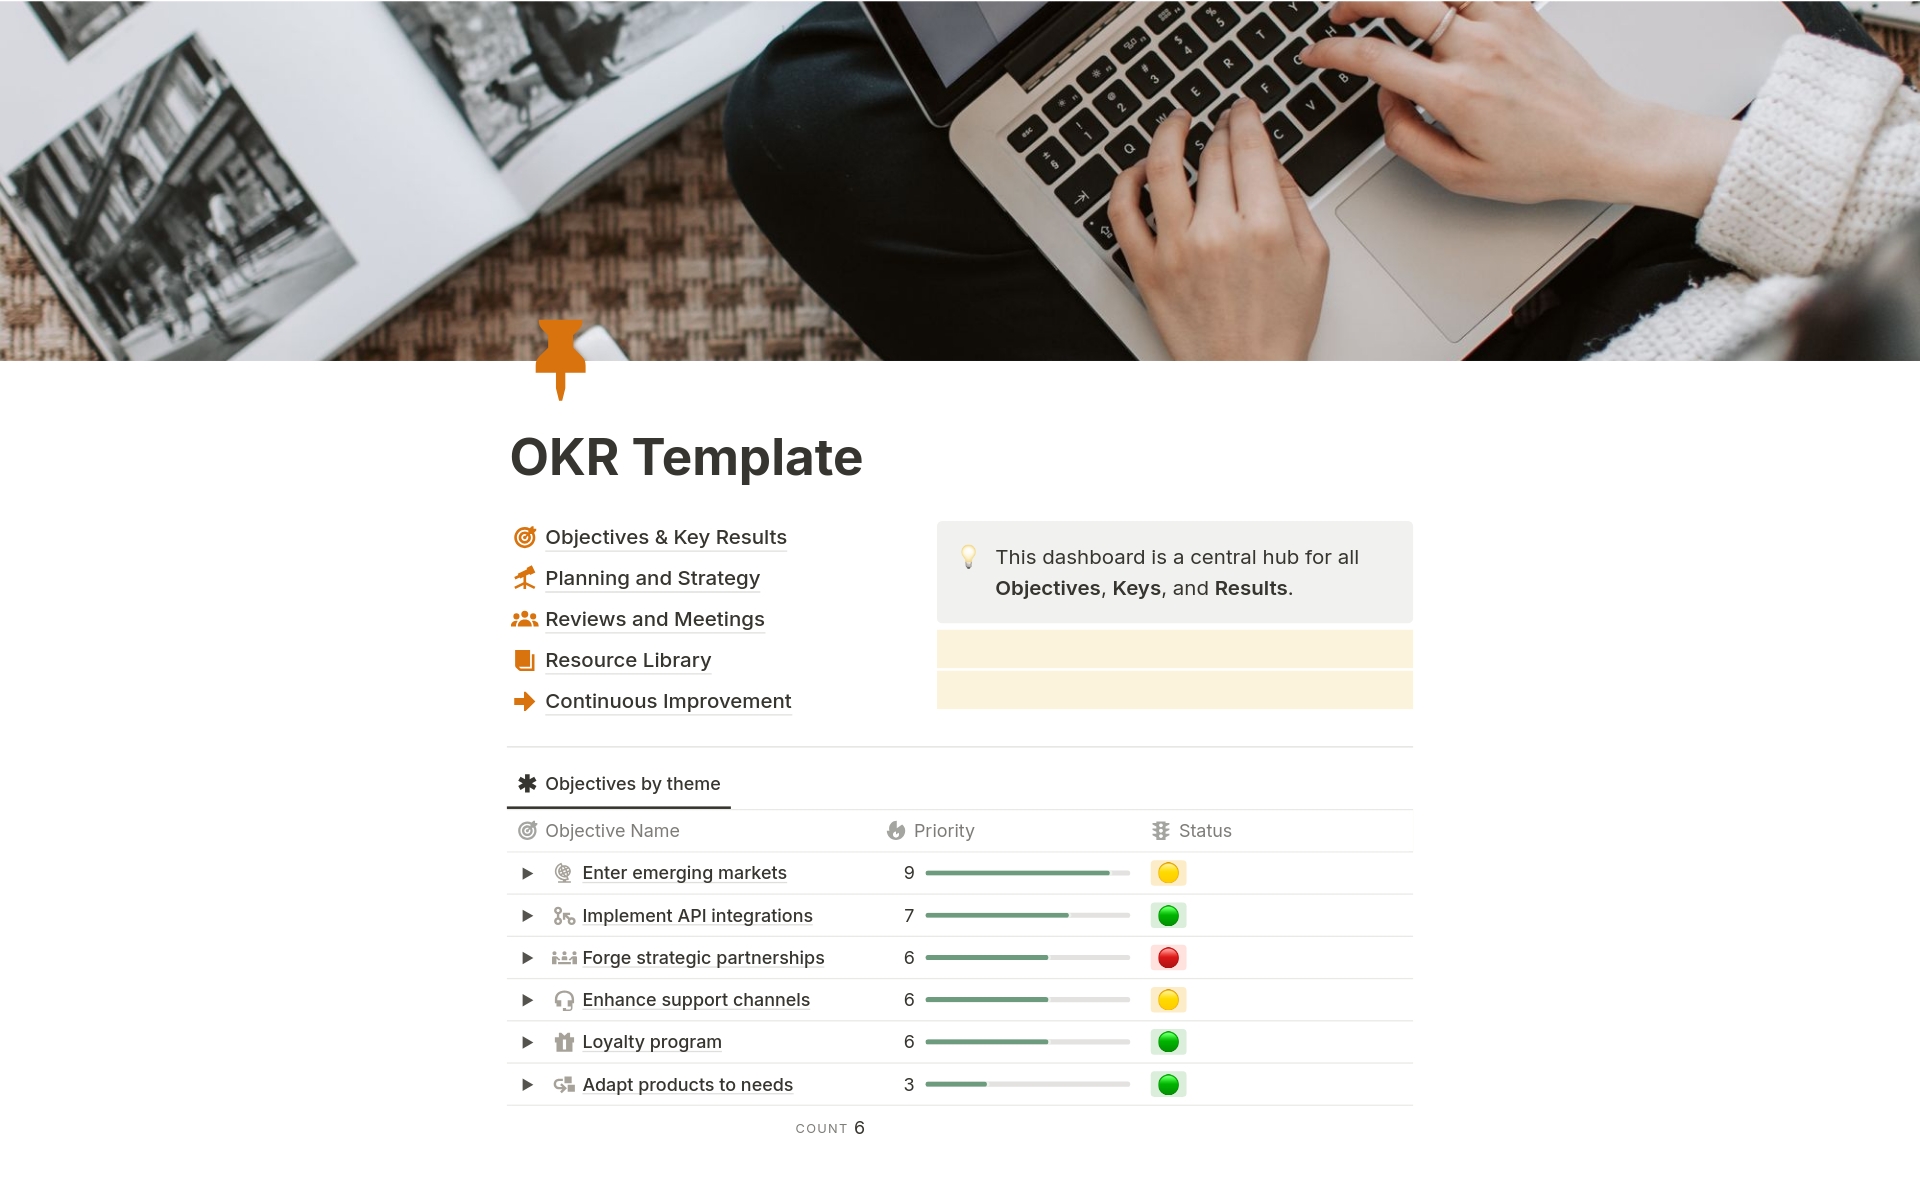 This Notion OKR (Objectives and Key Results) template, is enhanced with various features such as a Resource Library, Continuous Improvement page, and Reviews and Meetings organization. 
It solves several key problems typically encountered in goal setting and team management. 